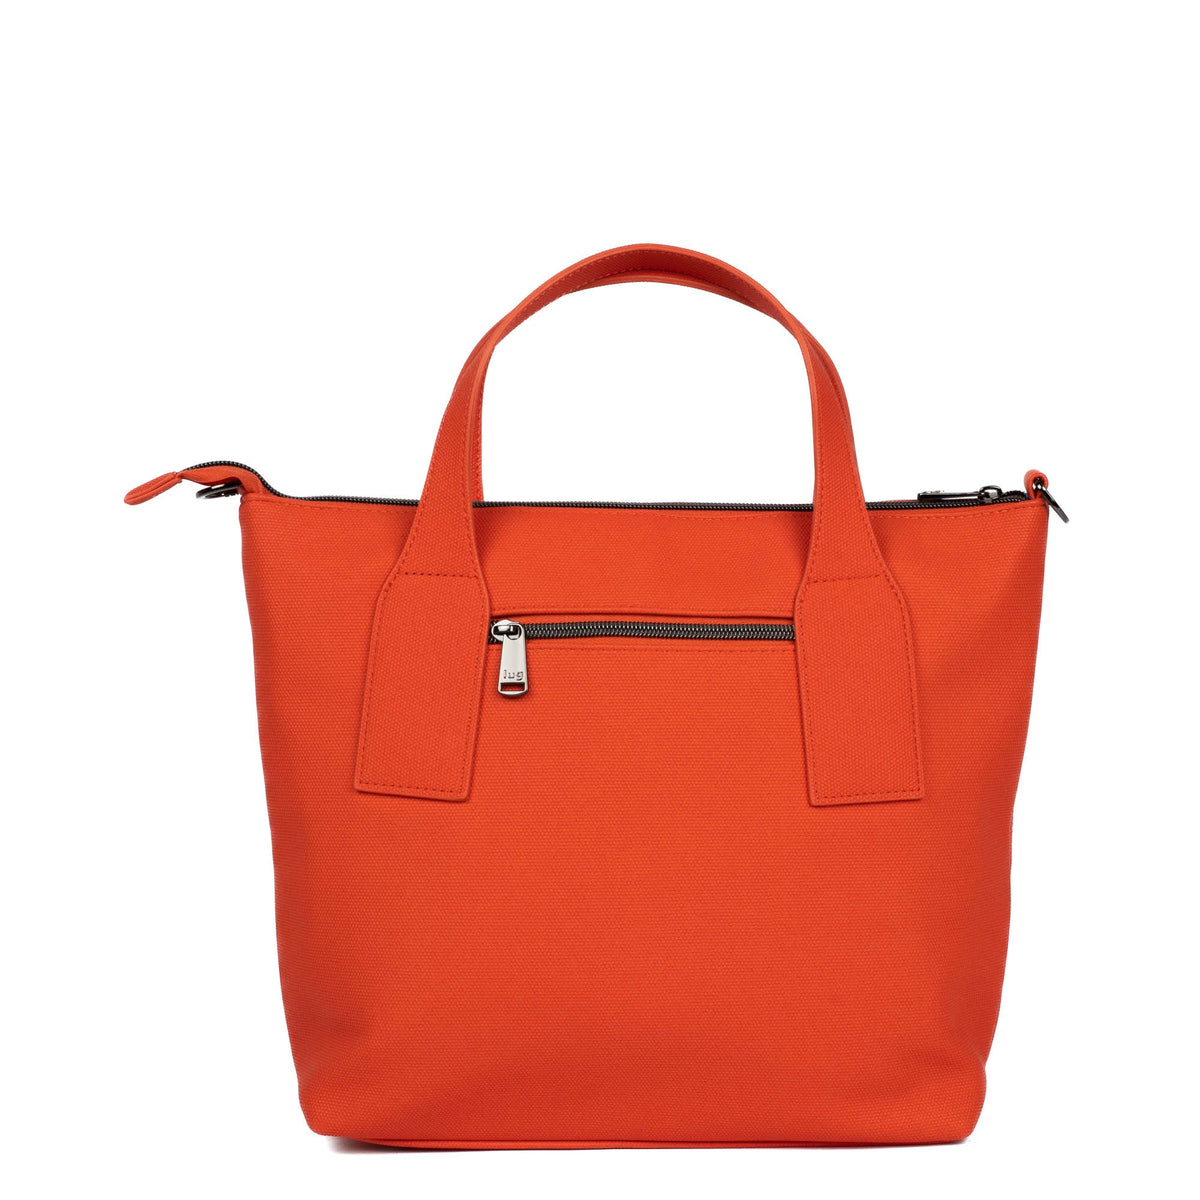 Best Coral Deux Lux Purse for sale in Mobile, Alabama for 2023